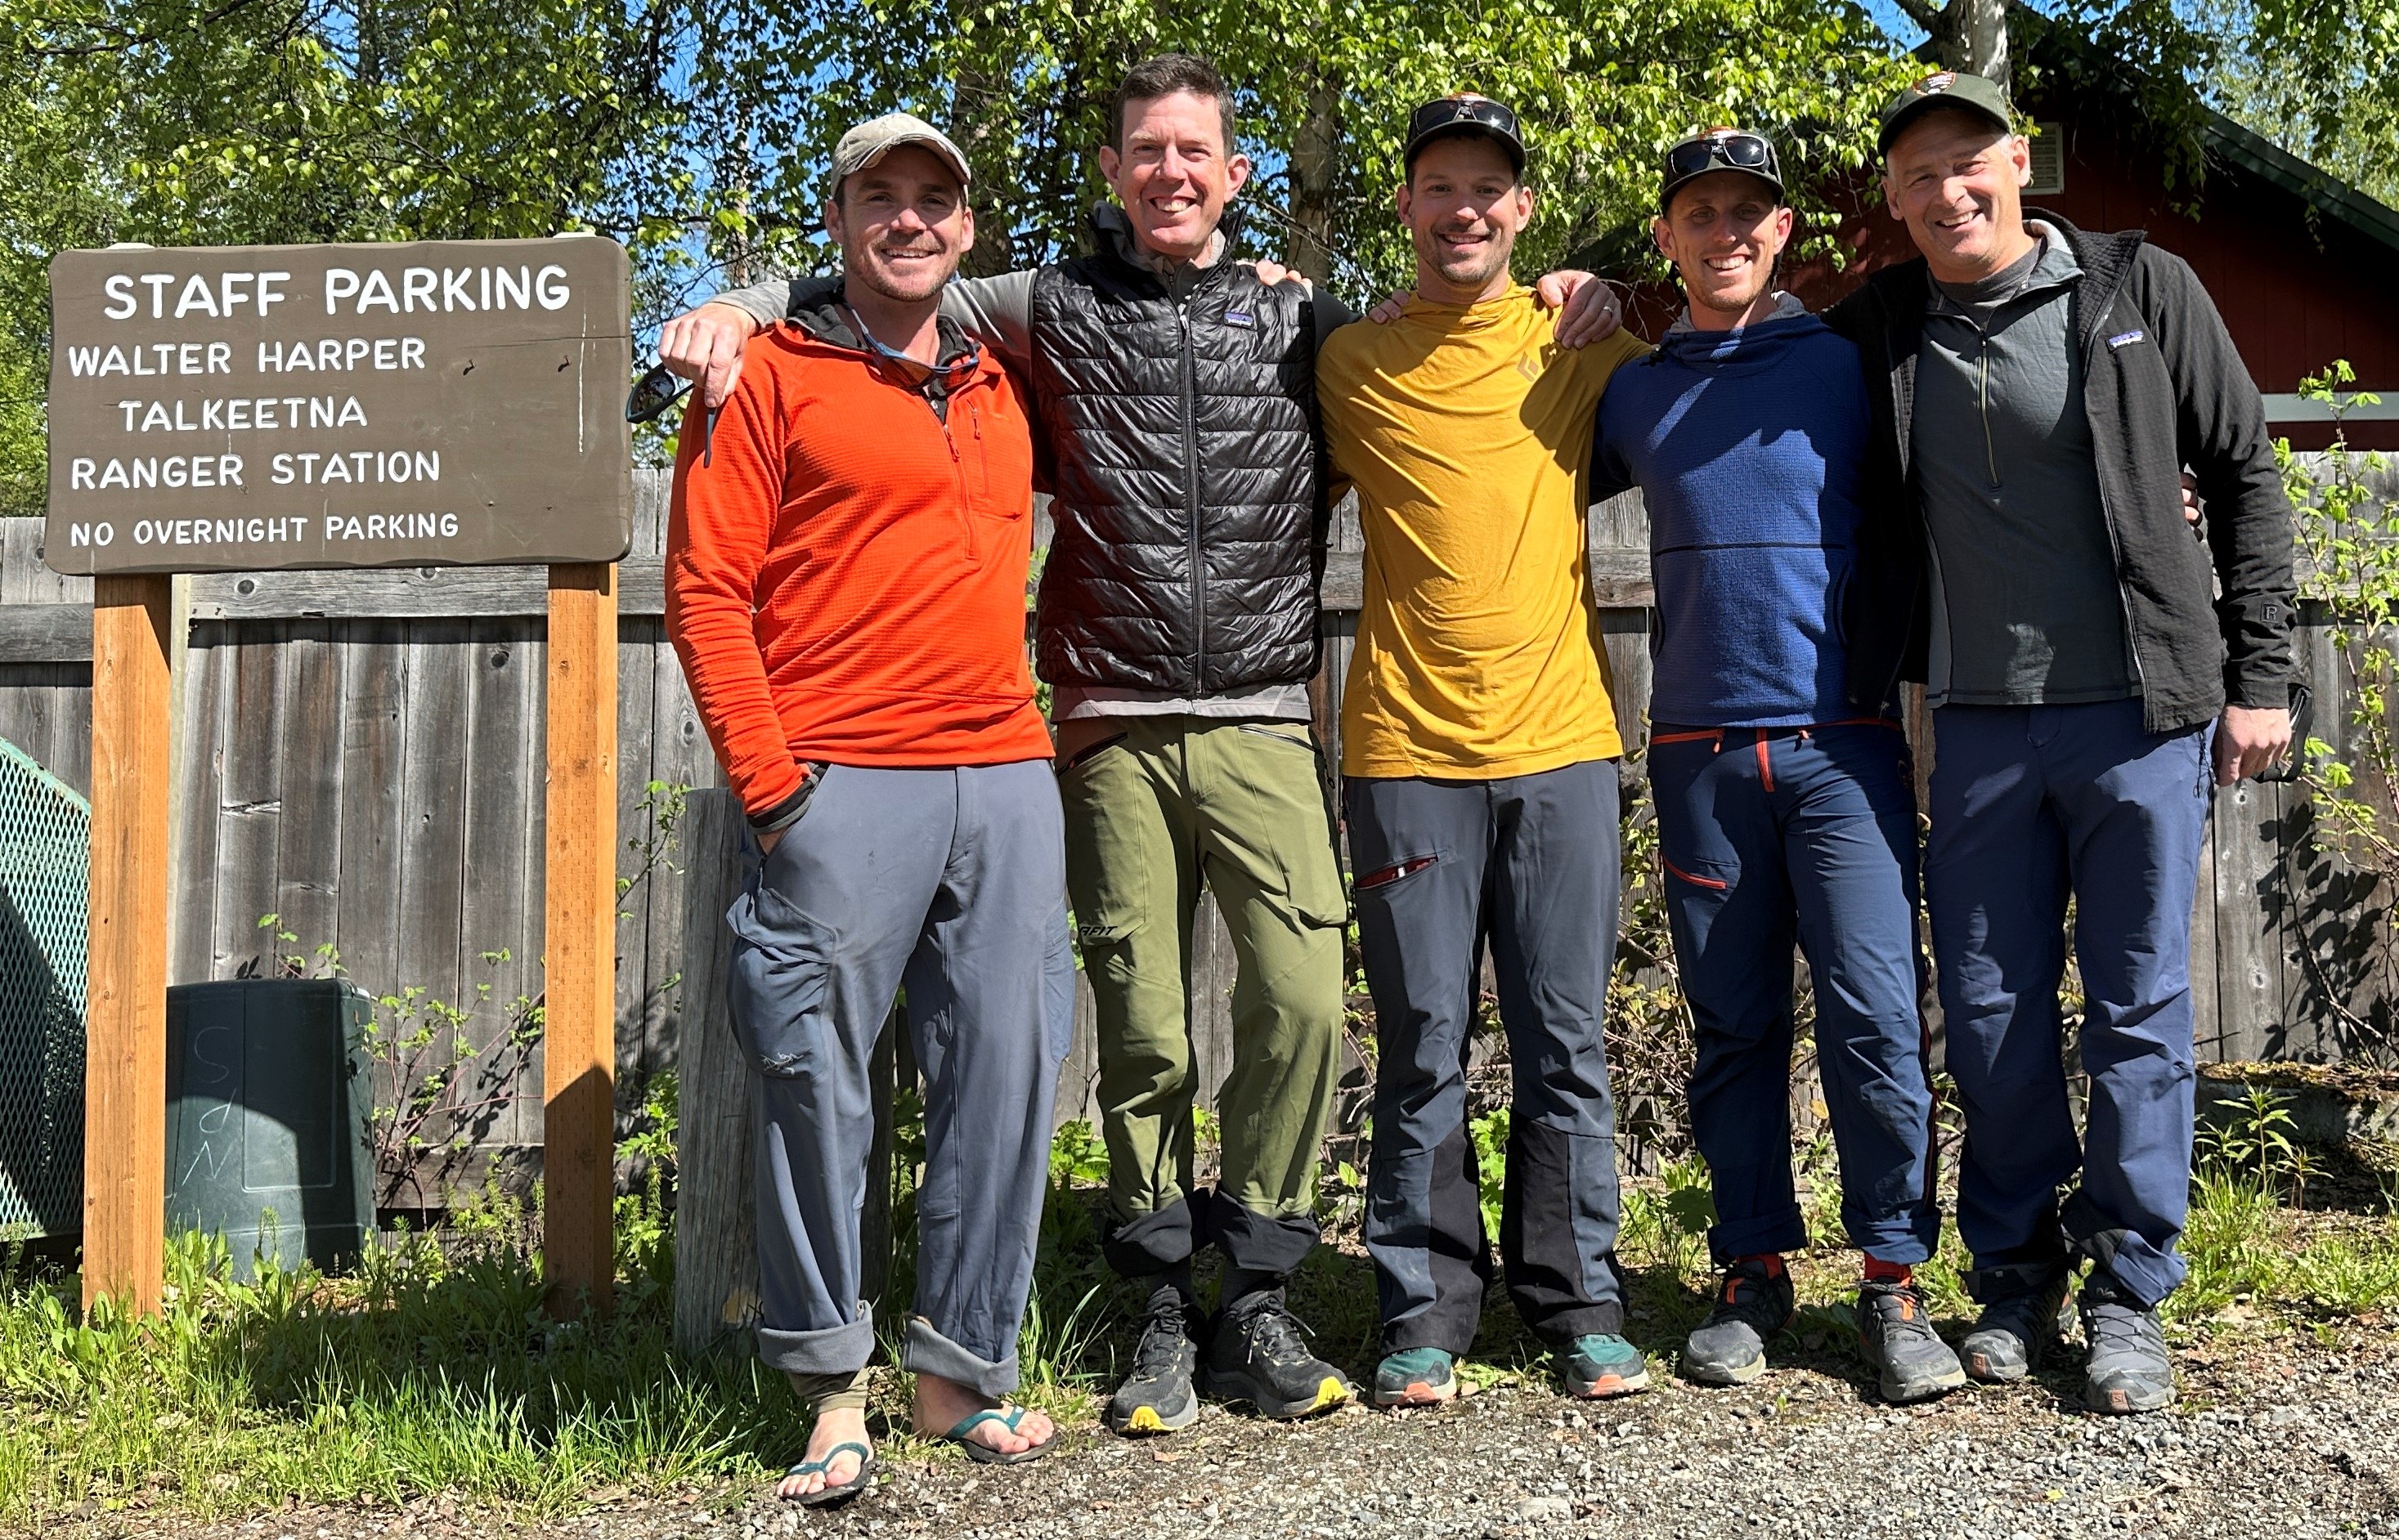 Five mountaineers stand next to a sign that says Walter Harper Talkeetna Ranger Station Staff Parking Only